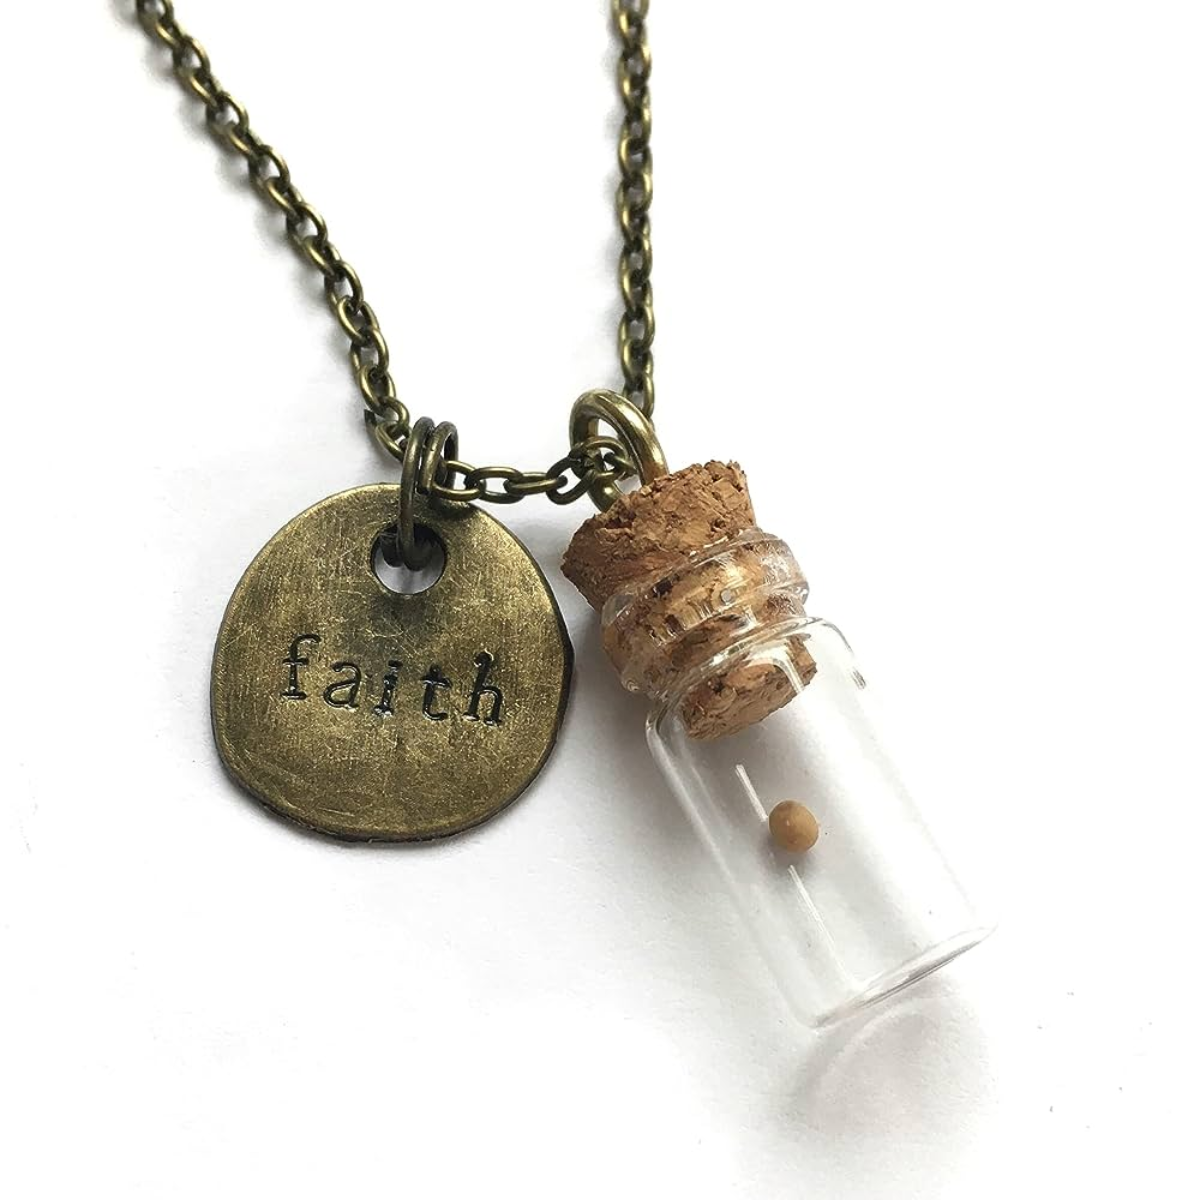 39. Forever Love: Personalized Message in a Bottle Necklace—A Unique and Thoughtful Anniversary Gift